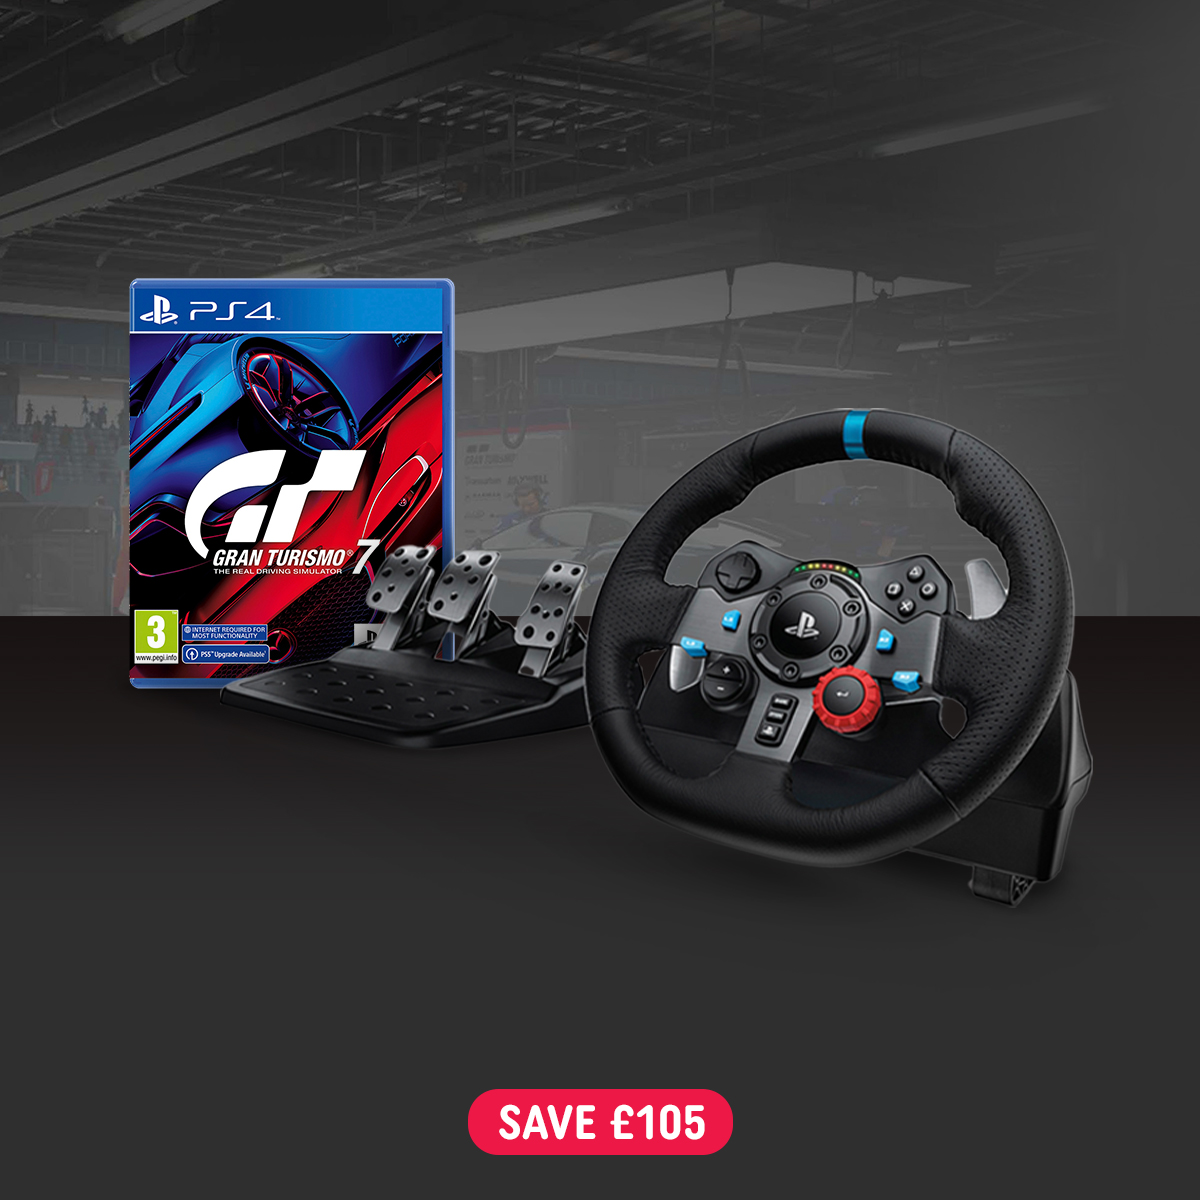 gift matematiker Brobrygge Smyths Toys UK on Twitter: "Unleash your passion for racing and SAVE up to  £125 with these Logitech G29 Driving Force Racing Wheel &amp; Gran Turismo  7 Bundles and these Logitech G29